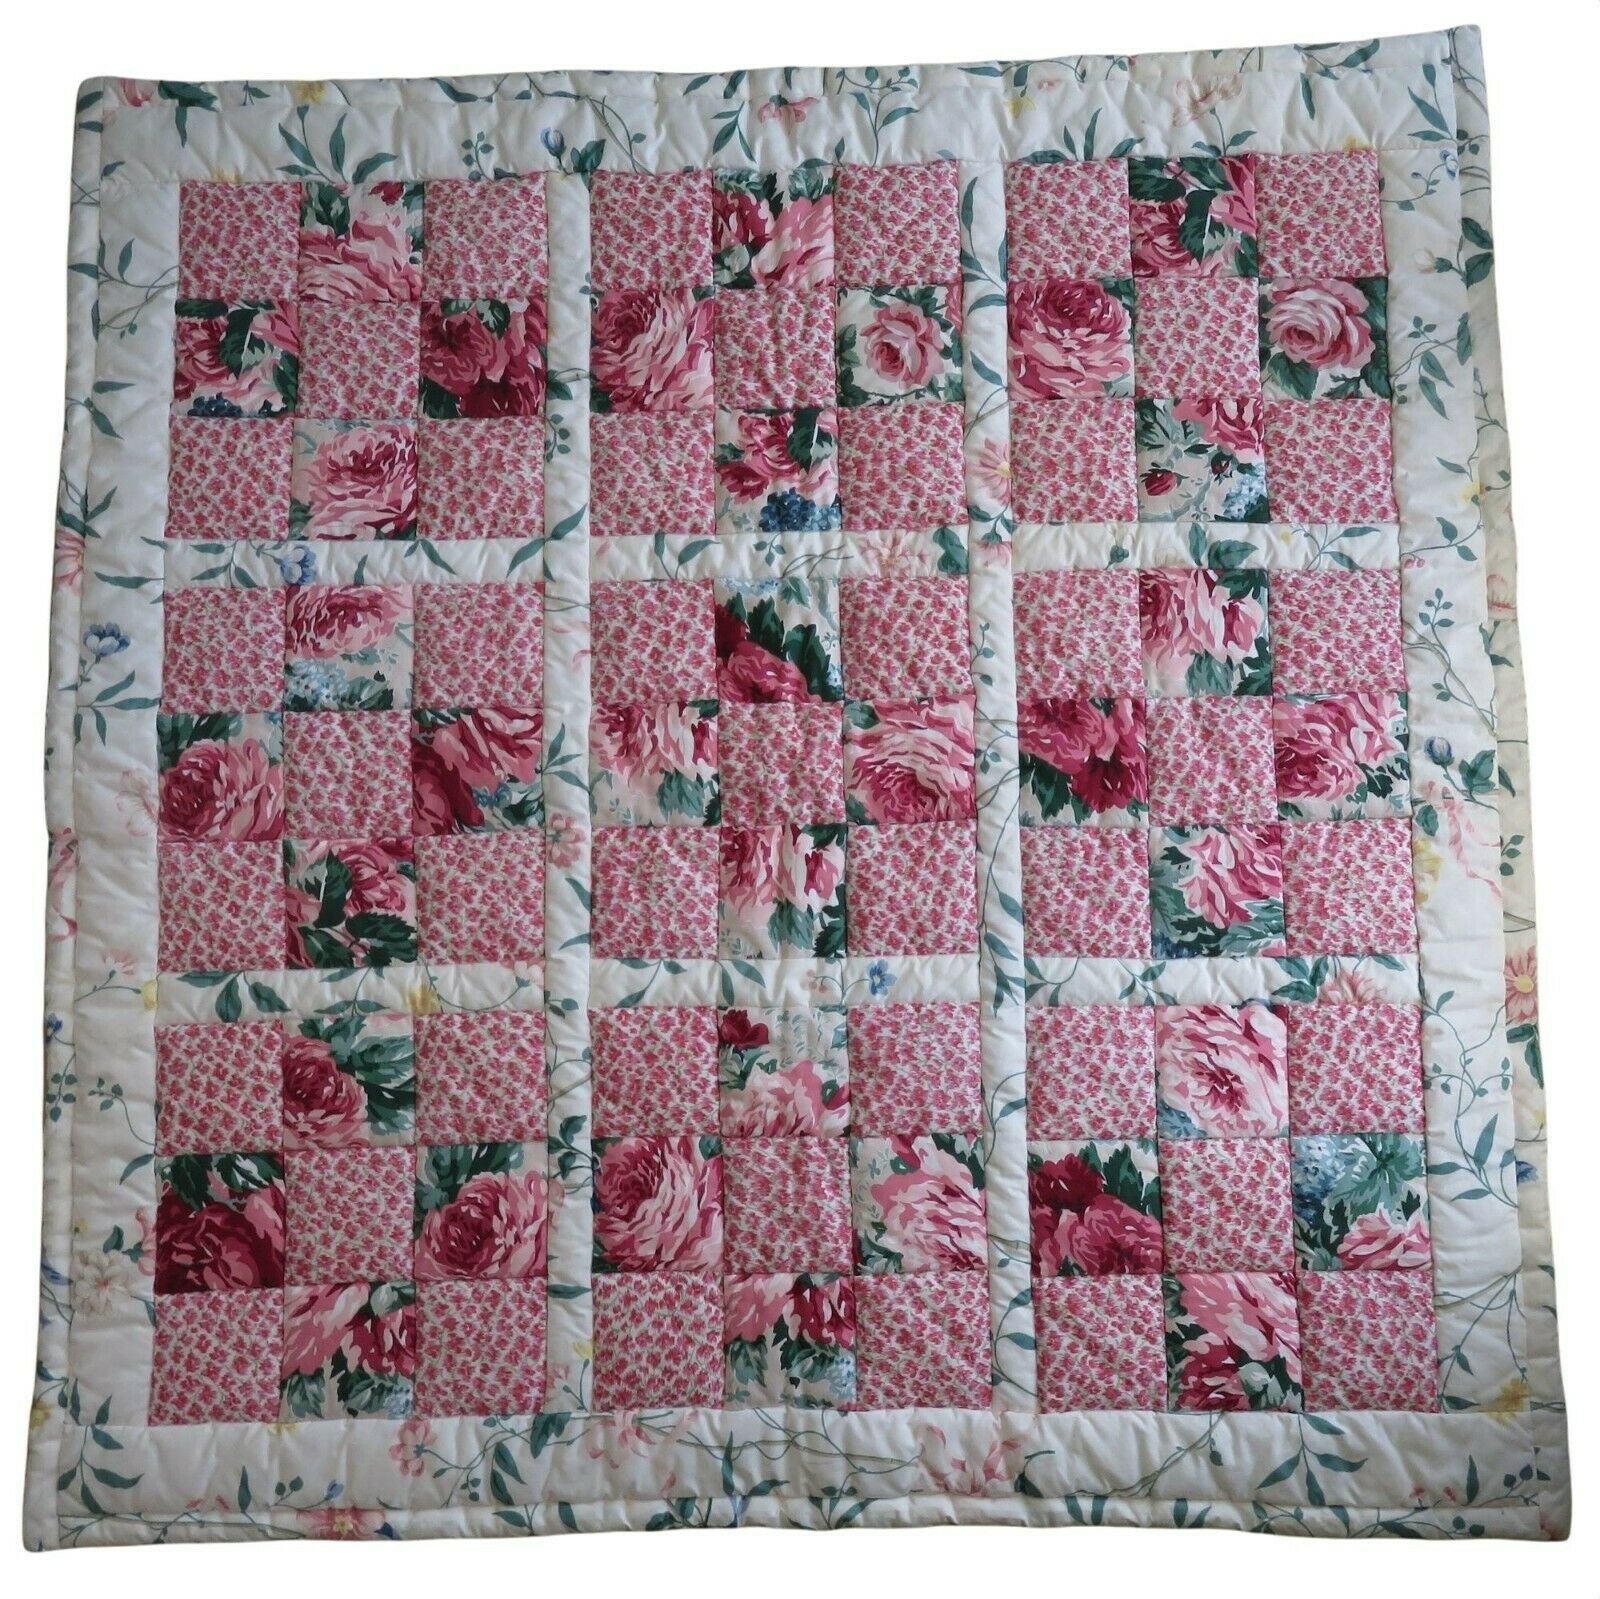 Primary image for Handmade Vintage Floral Patchwork Quilt Reversible Throw Blanket Crib 43 x 43